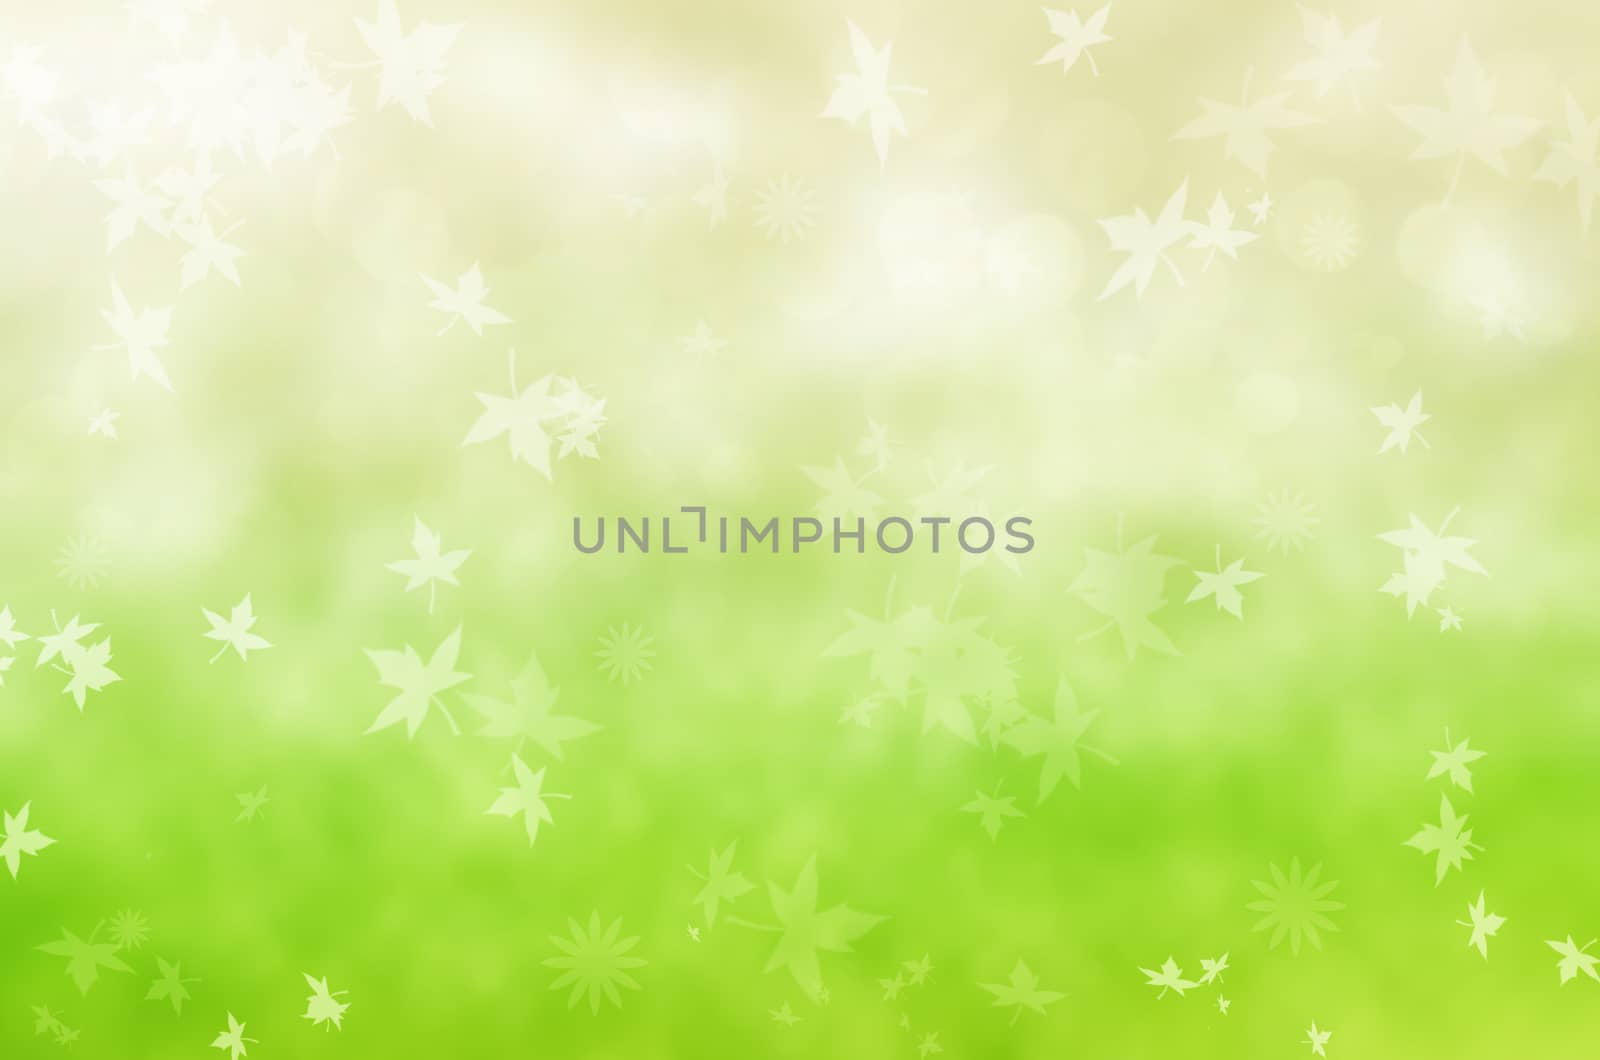 Abstract Christmas background.Holiday abstract background